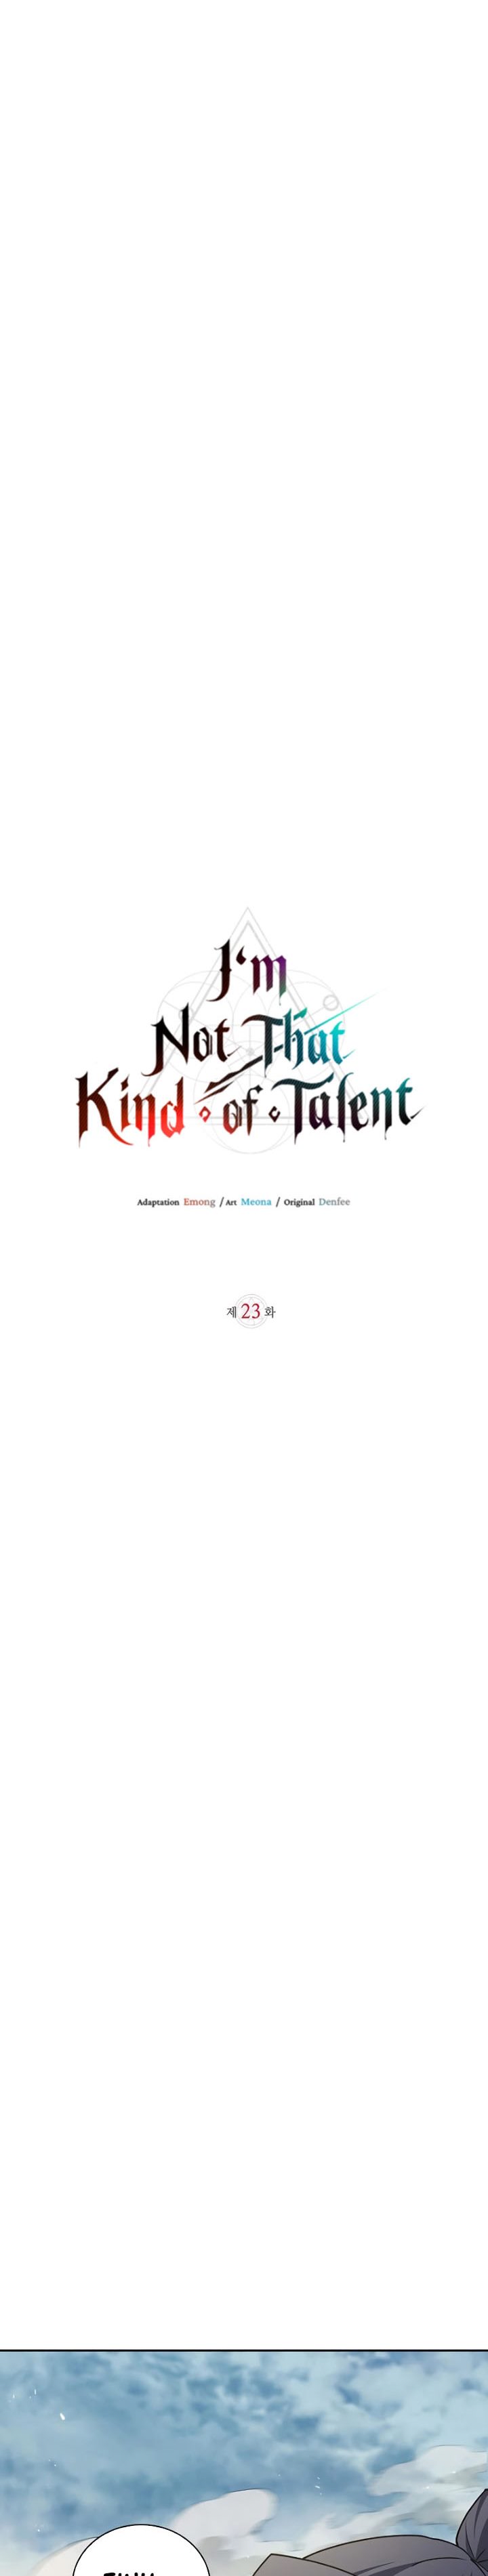 I’m Not That Kind of Talent Chapter 23 12